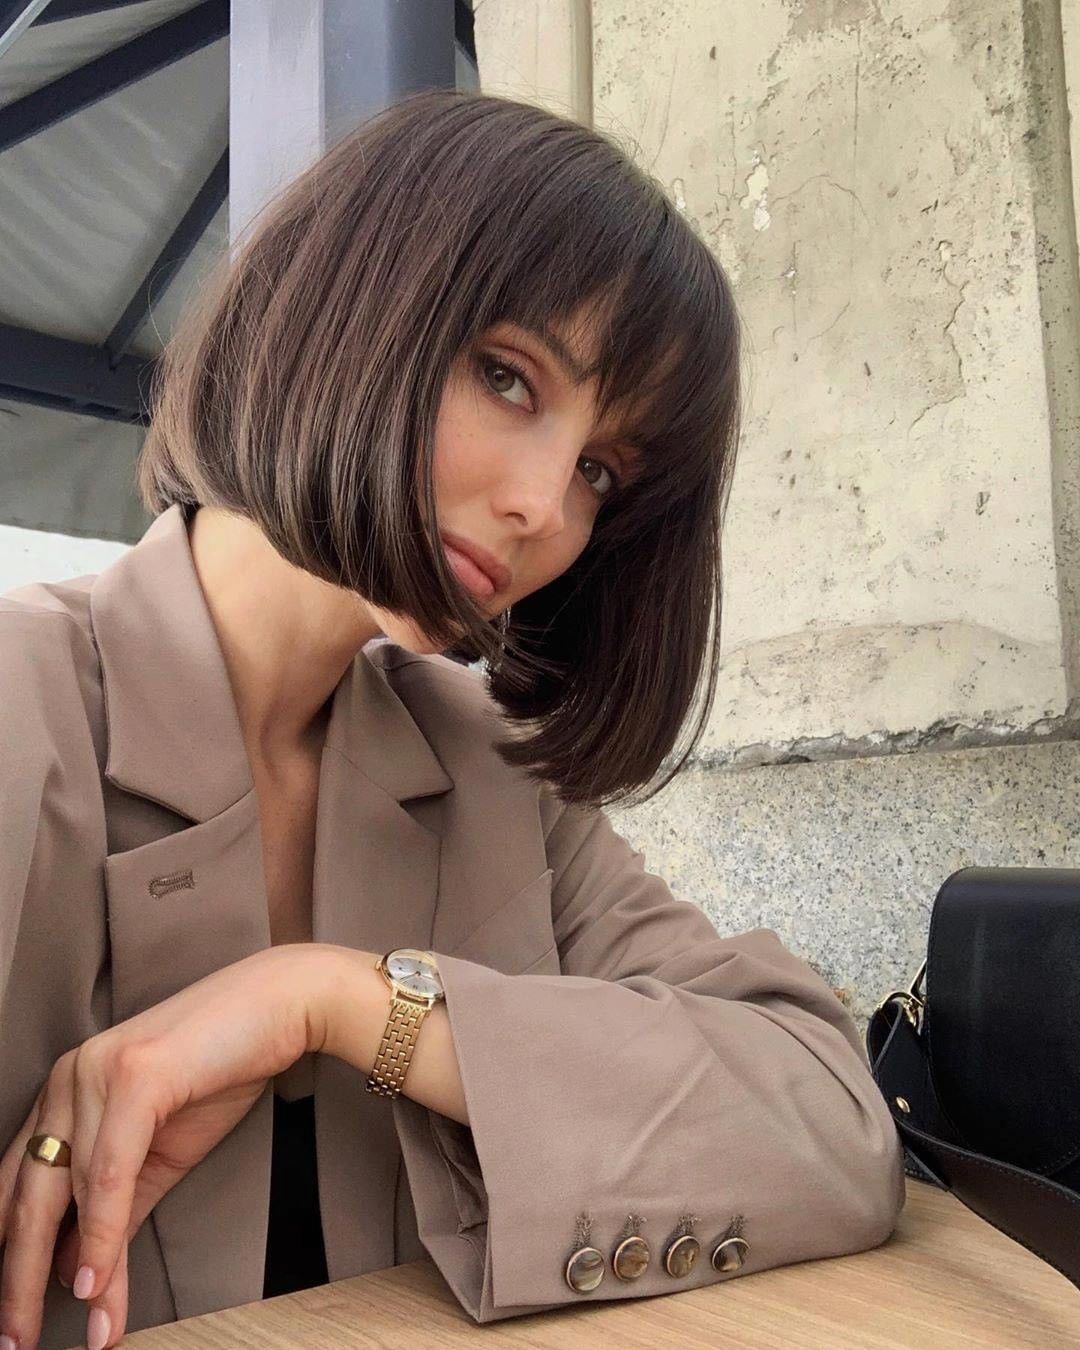 Chic and Stylish Straight Bob Hairstyle Ideas - Bob Hair Colors To Look Special